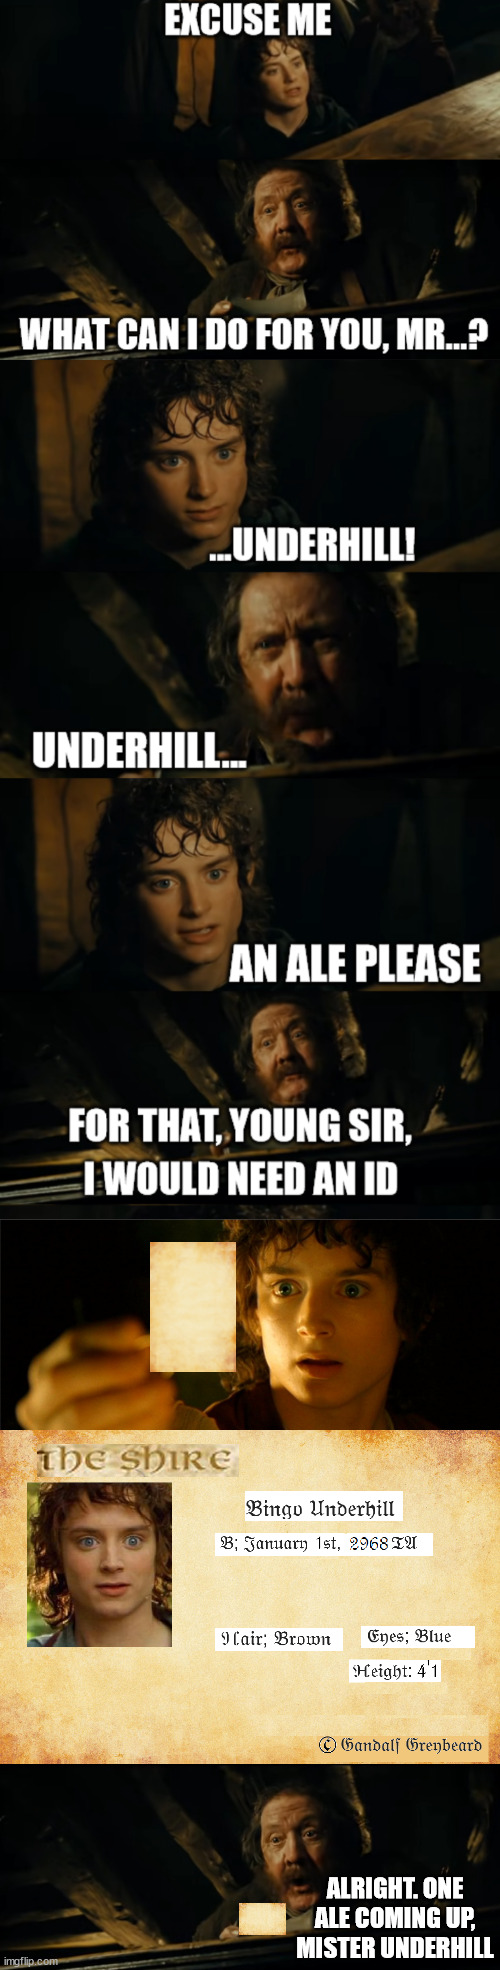 Mr Underhill | ALRIGHT. ONE ALE COMING UP, MISTER UNDERHILL | image tagged in frodo | made w/ Imgflip meme maker